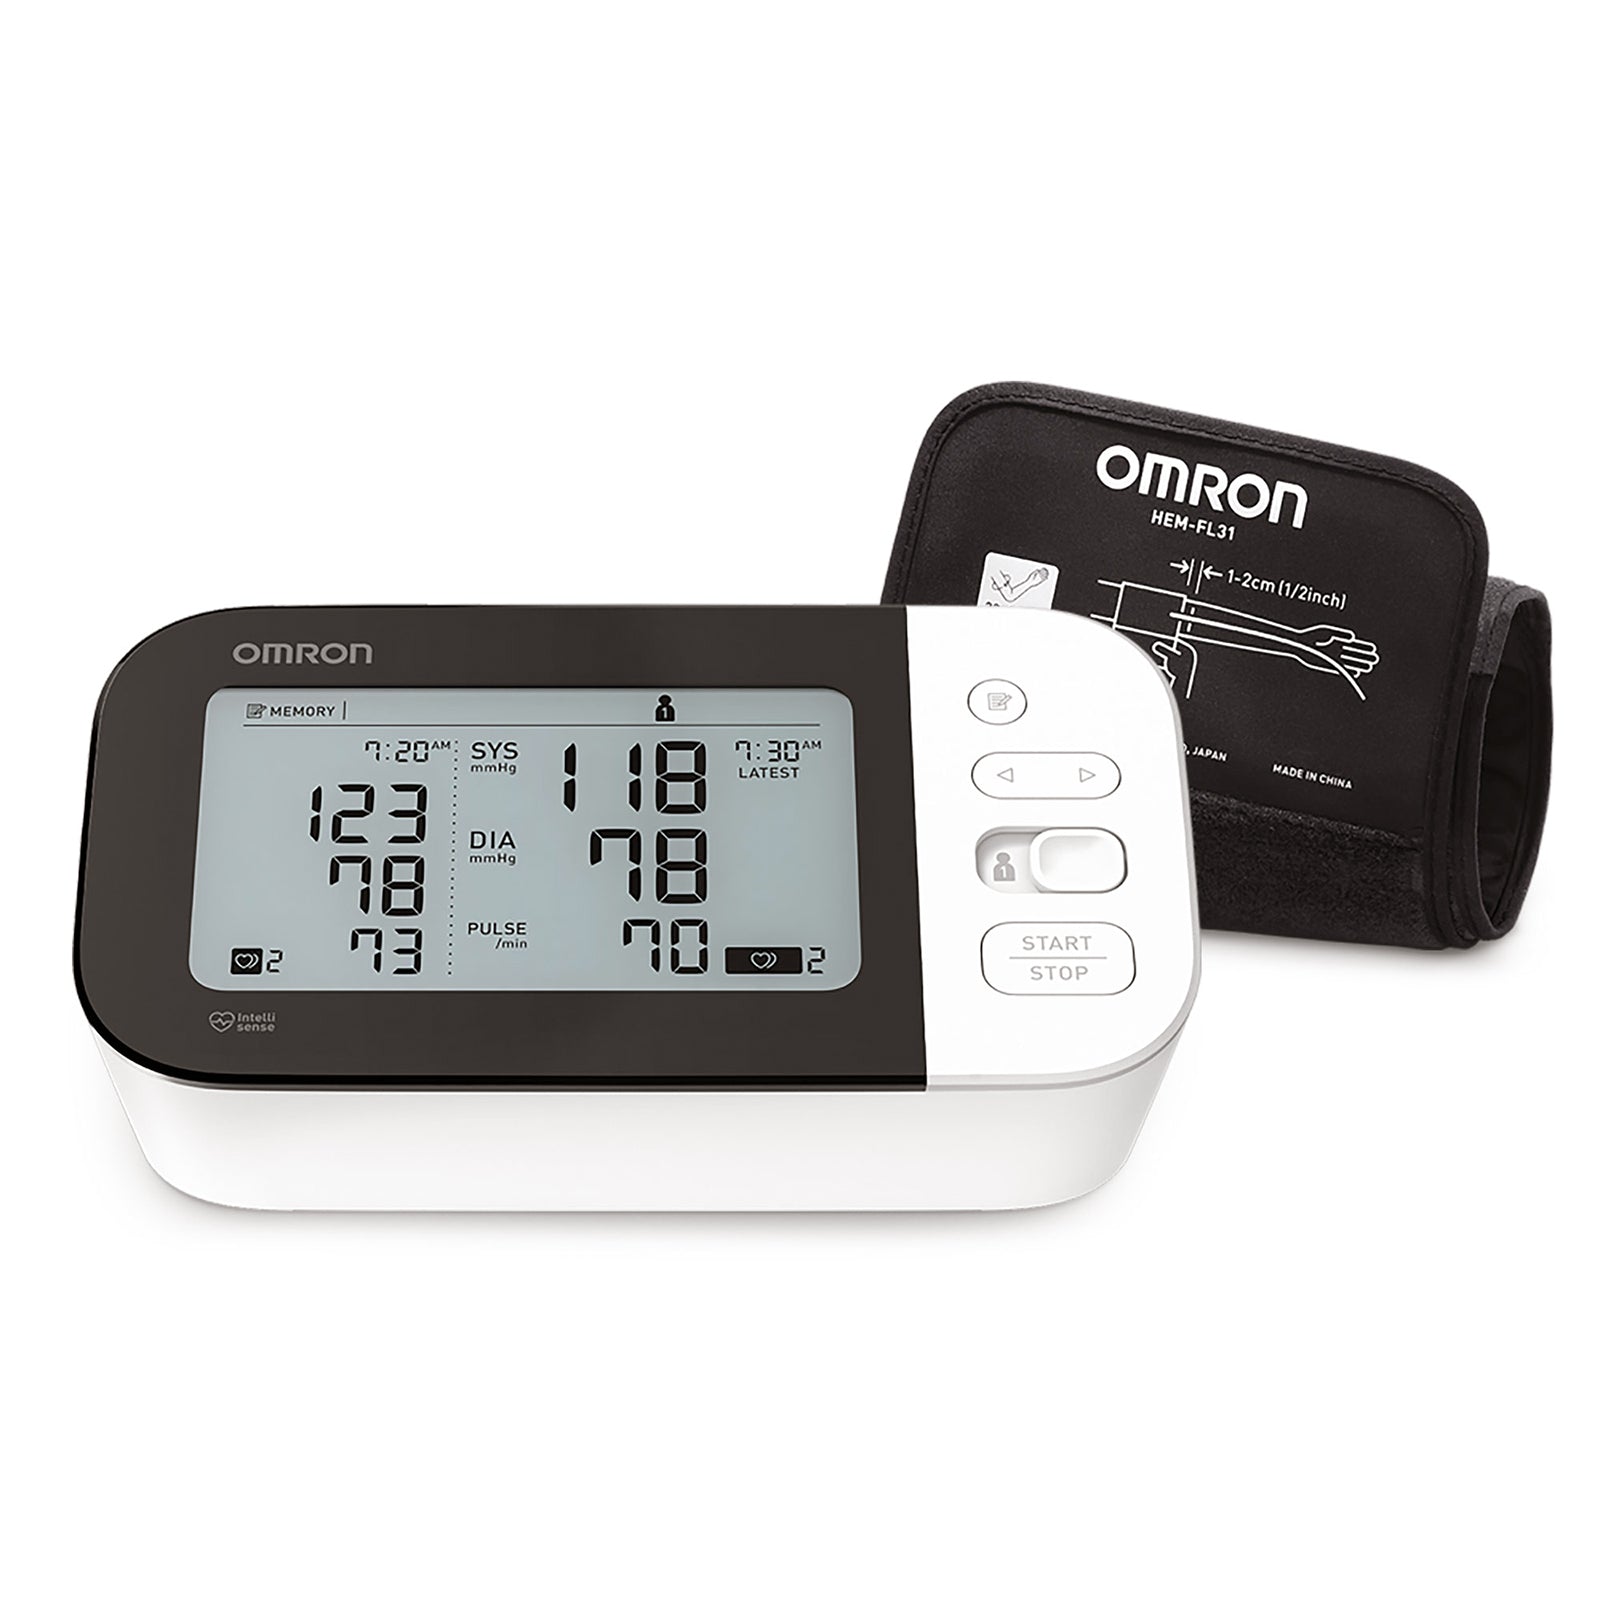 OMRON BLOOD PRESSURE MONITOR 3 SERIES UPPER ARM ONE-TOUCH OPERATION BP7100  - NEW